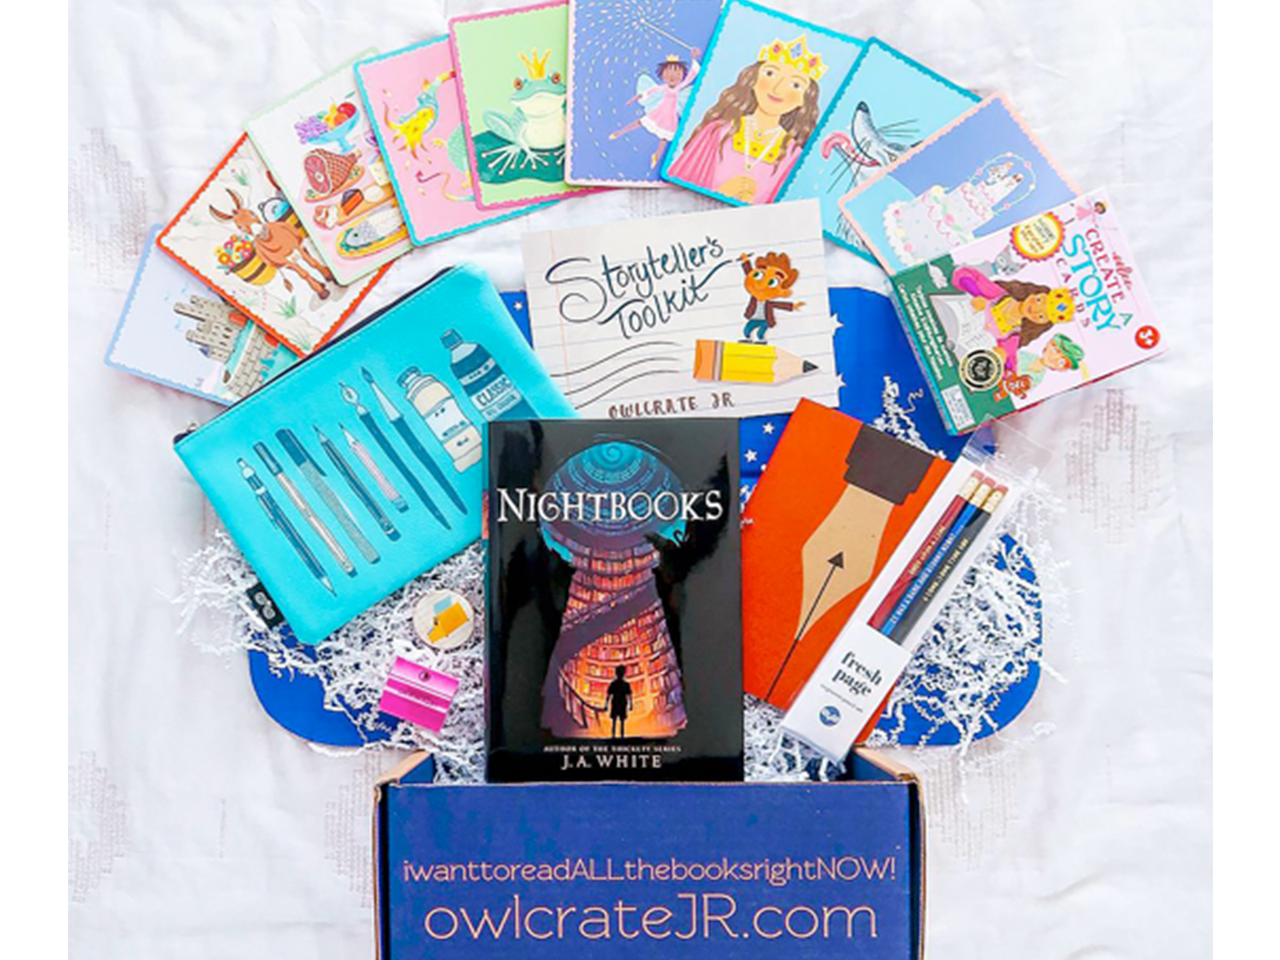 books and magic-themed subscription box for kids